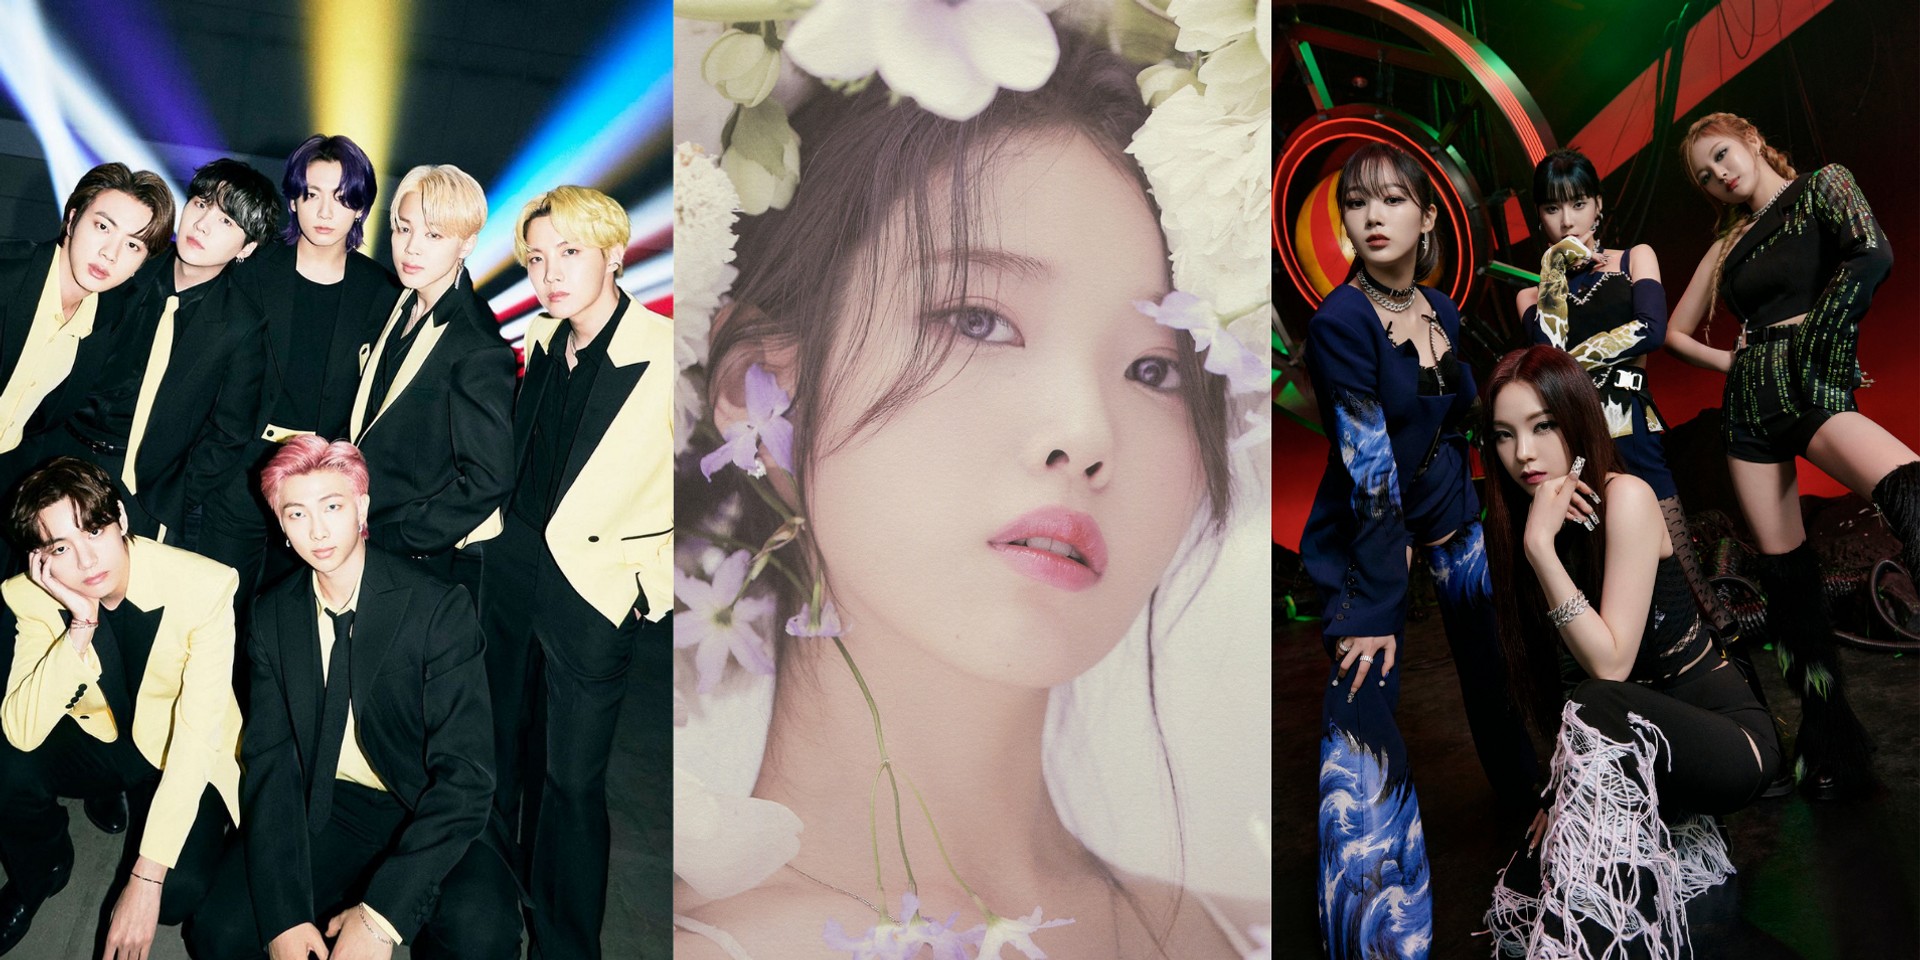 Here are the winners of the 2021 Melon Music Awards - IU, BTS, Coldplay, aespa, and more